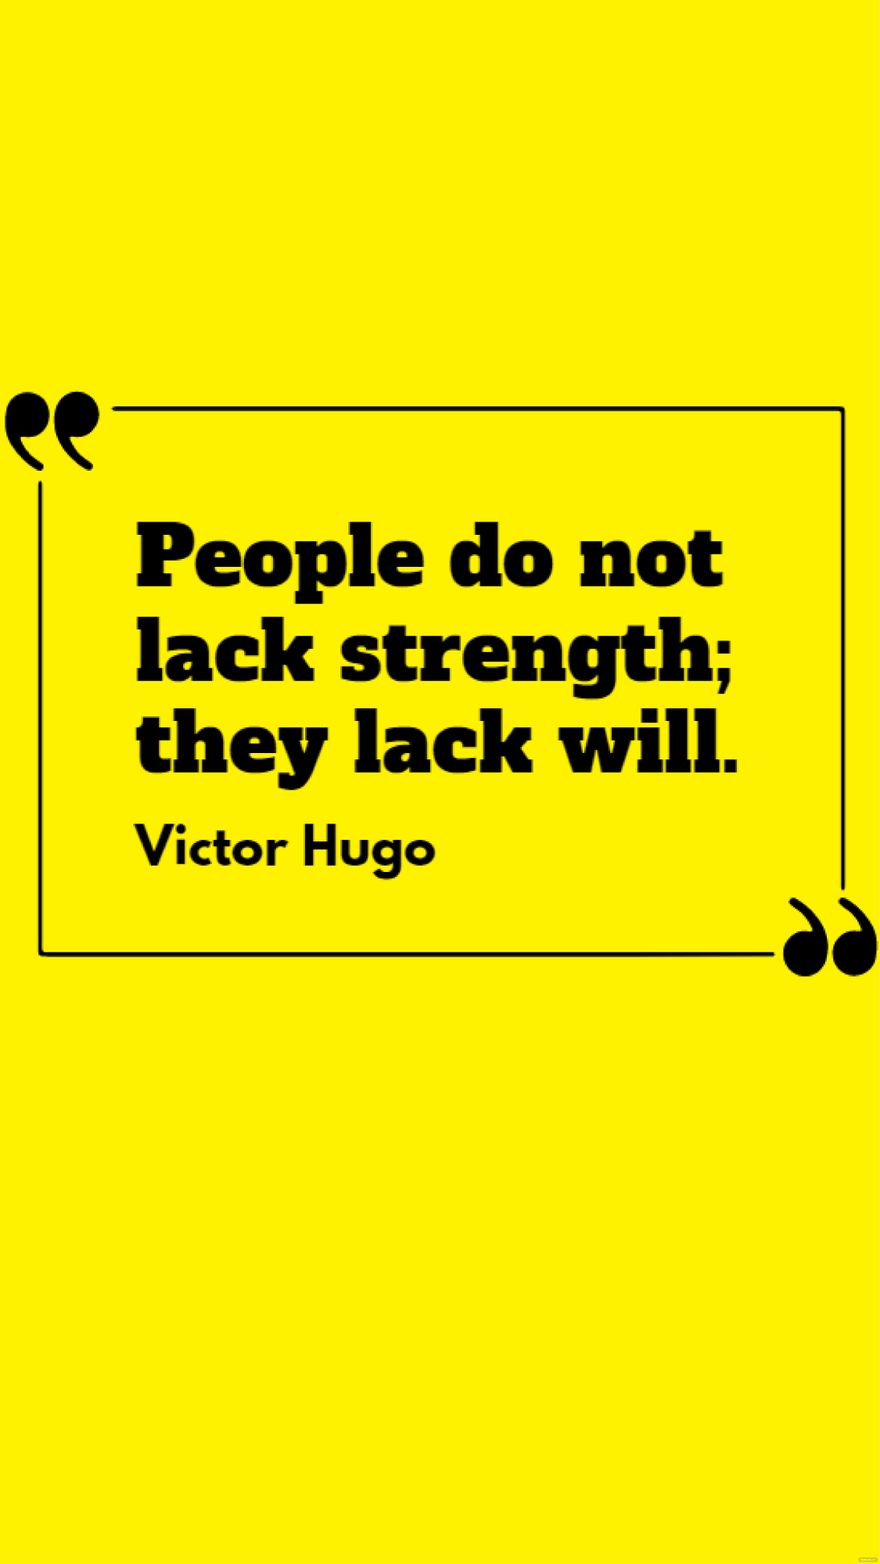 Victor Hugo - People do not lack strength; they lack will.